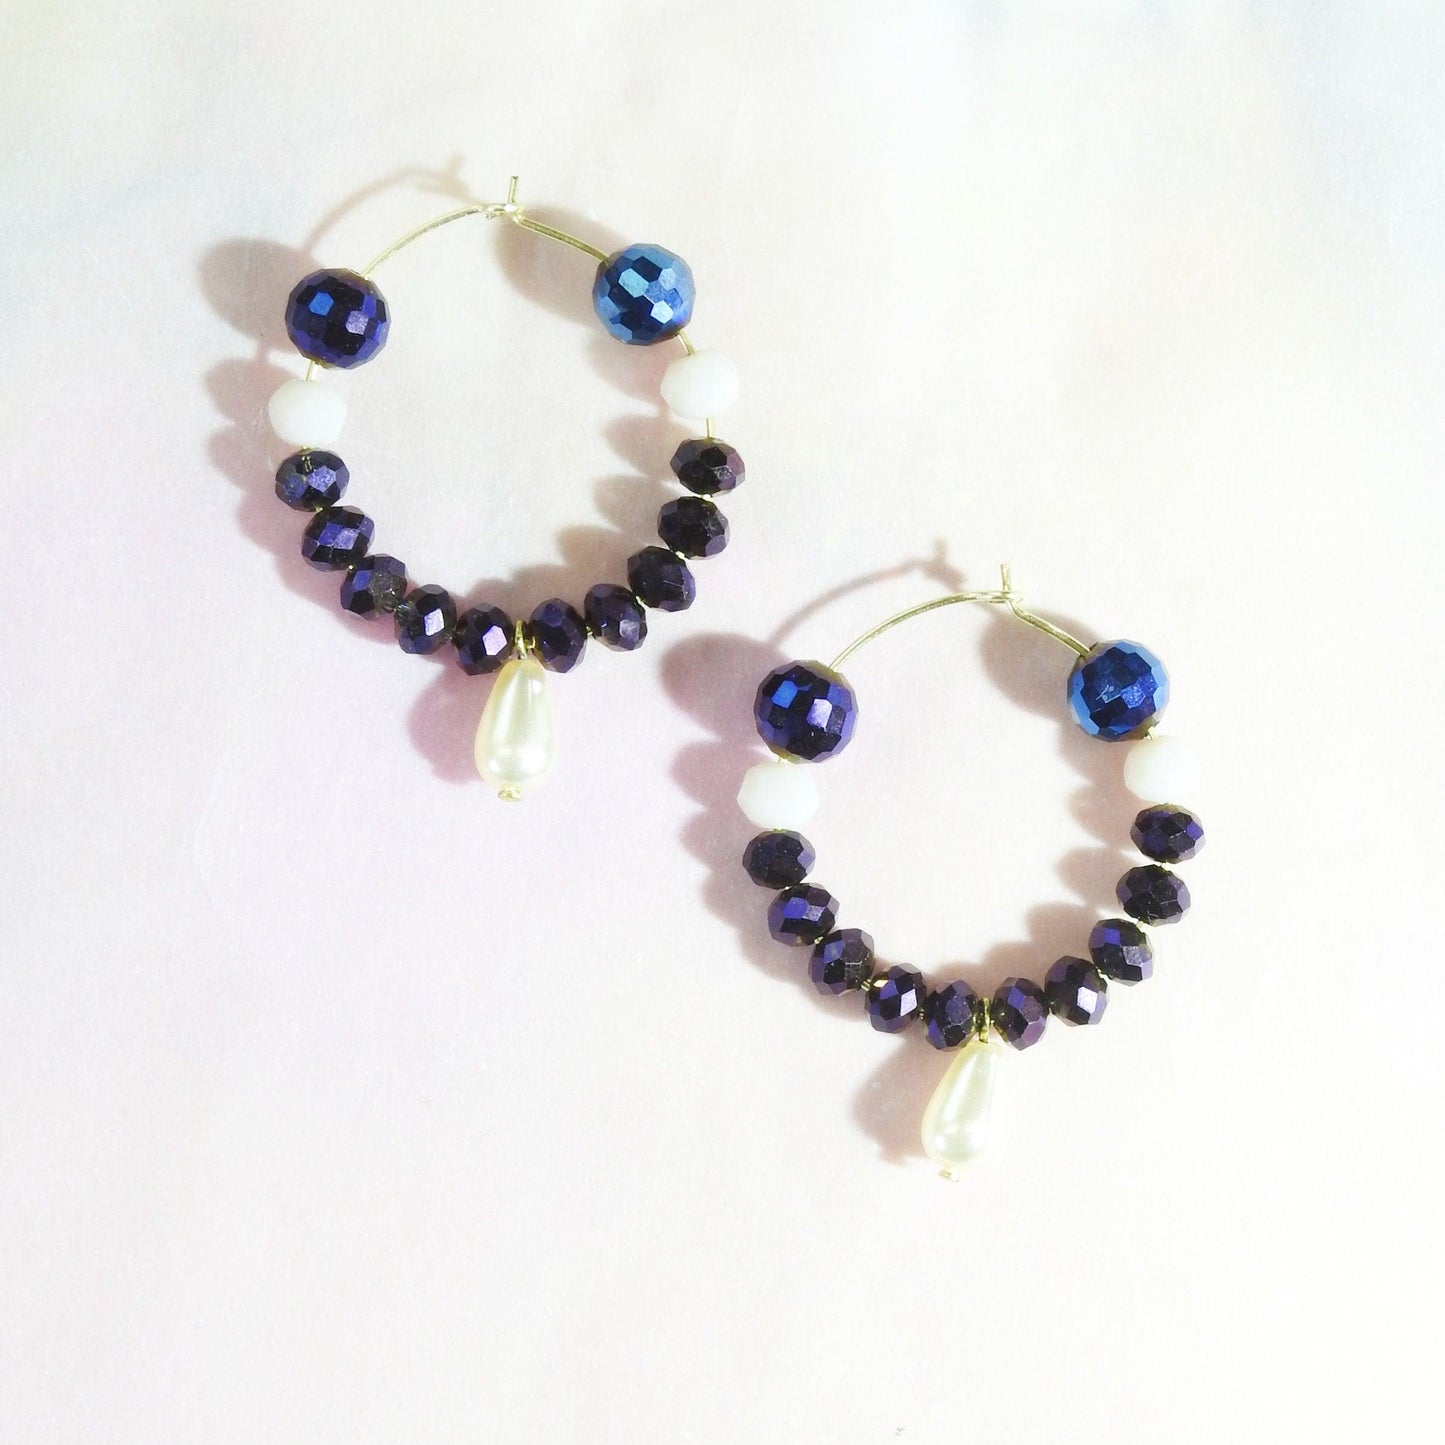 Purple glass bead earrings hoop with eye-catching dark blue, aubergine colored, and white faceted Austria glass beads. 30 mm